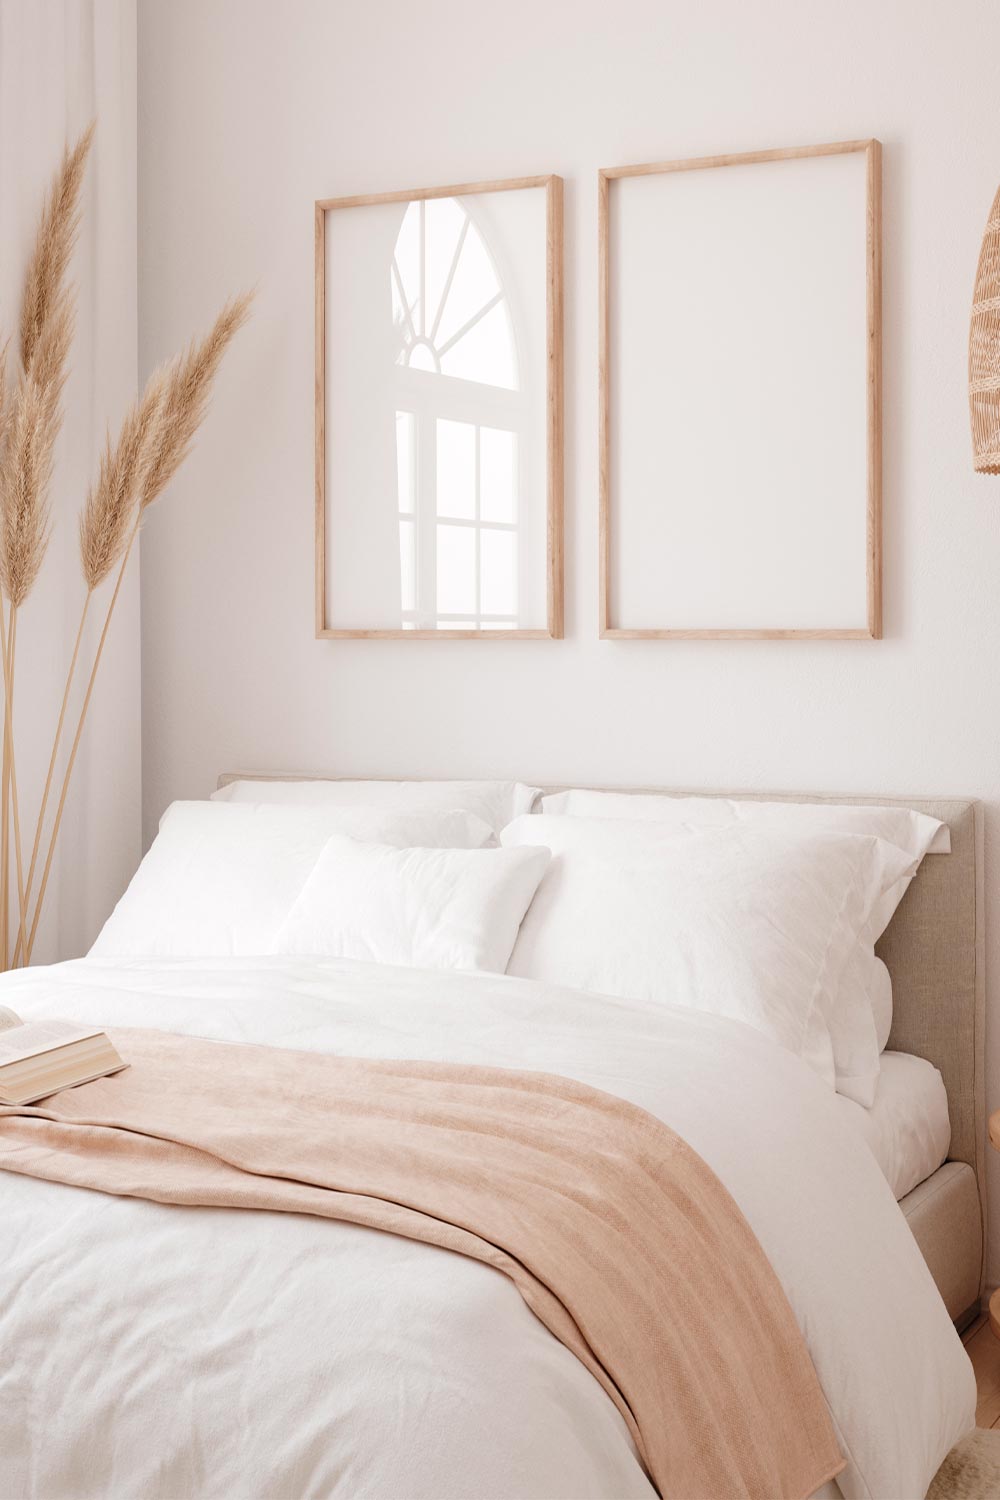 How To Create A Boho Bedroom - 61 Modern Bohemian Ideas You Must Consider  For A Cozy Bedroom